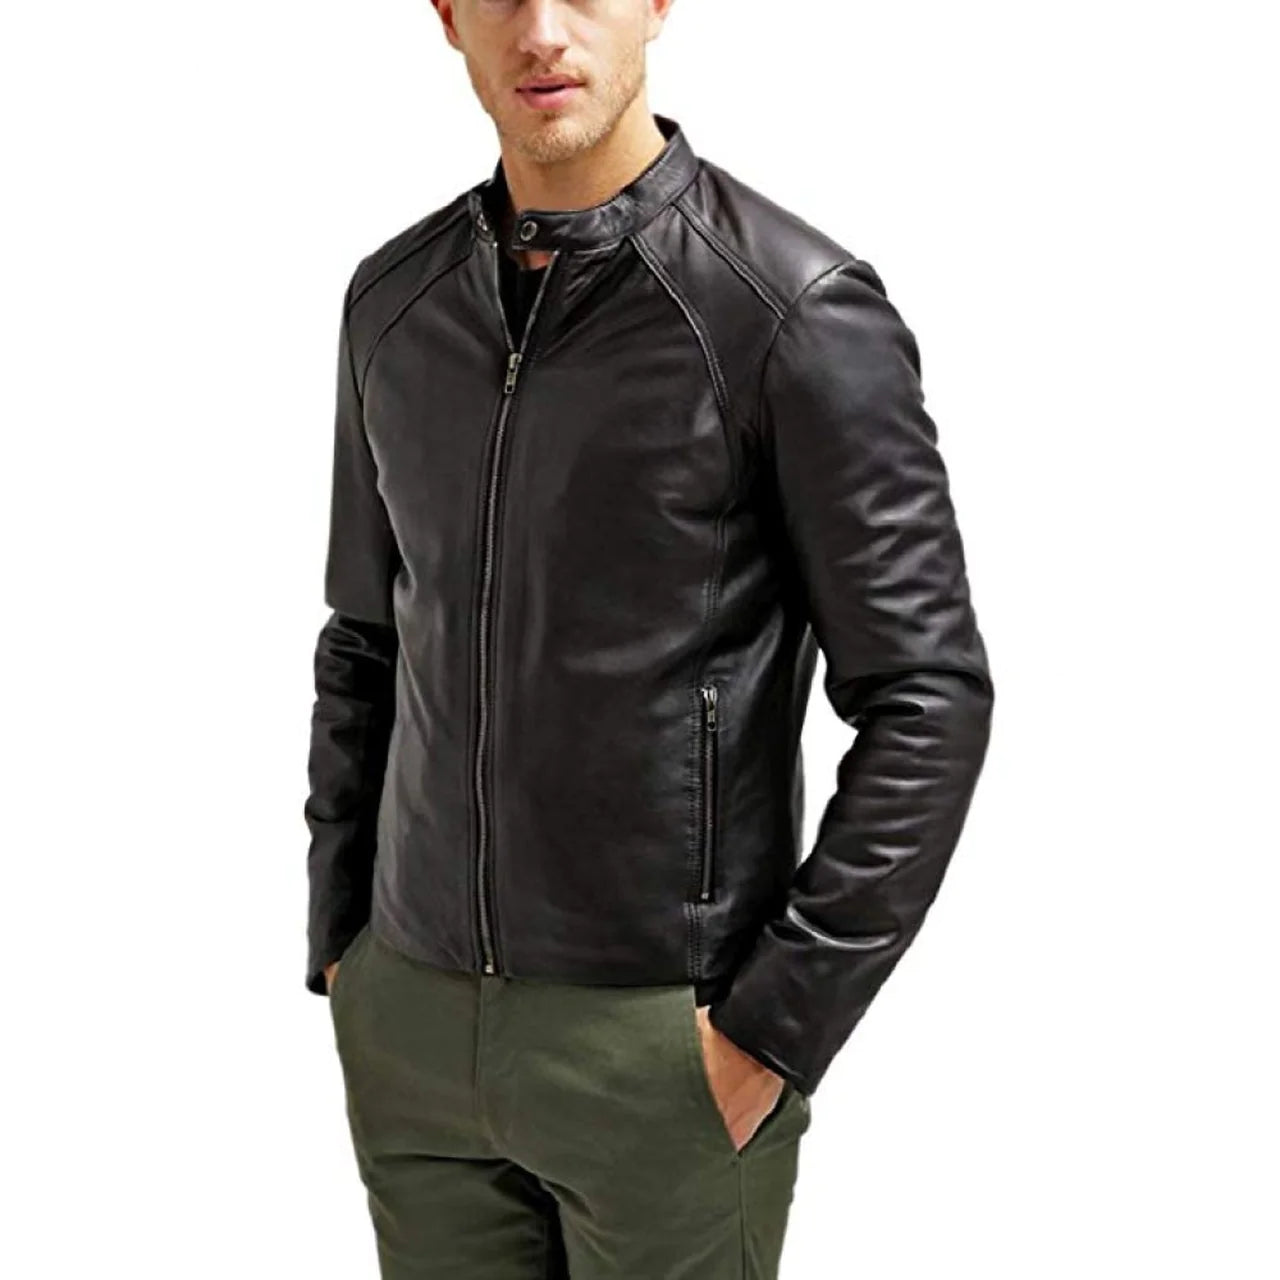 How To Up Your Workplace Attire With A Leather Jacket - Mush Editions ...